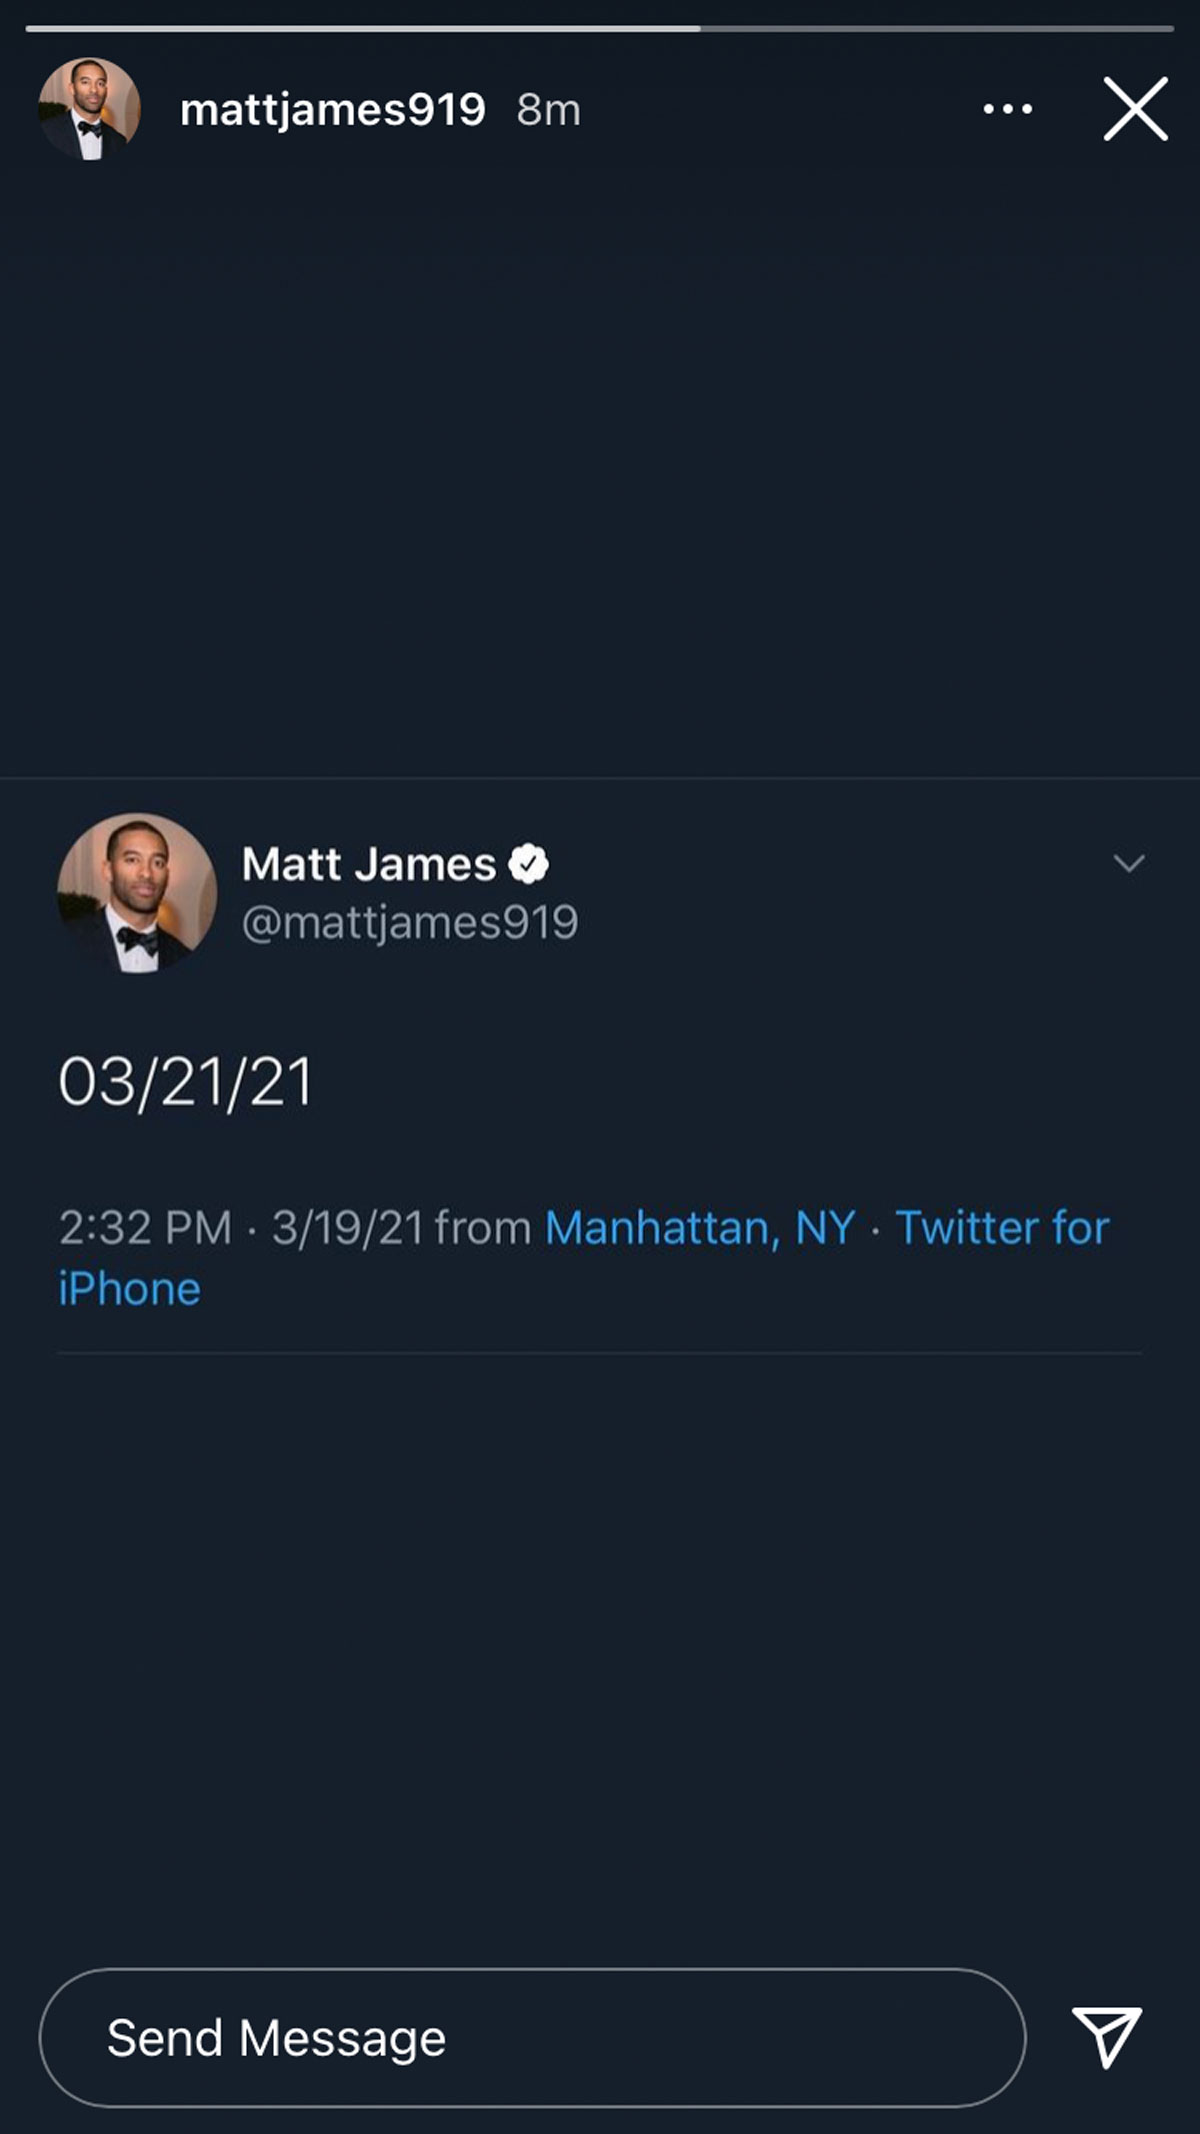 Now Matt James is doing a cryptic Instagram countdown to Sunday! What happens Sunday??